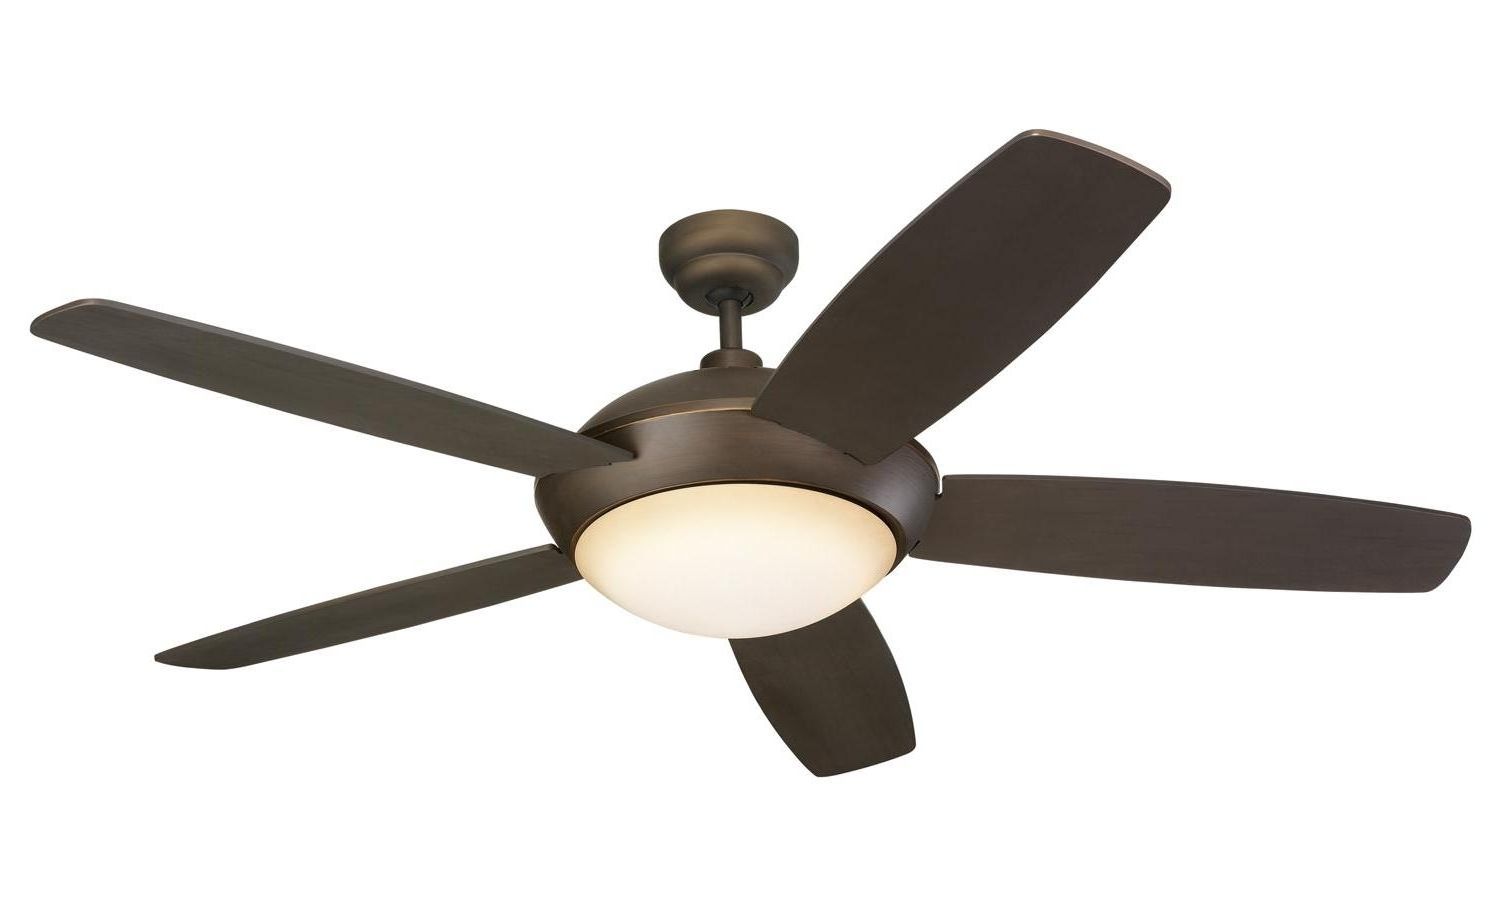 Outdoor Ceiling Fans With Lights And Remote Control Intended For Most Up To Date Functional Ceiling Fans With Lights And Remote (View 10 of 20)